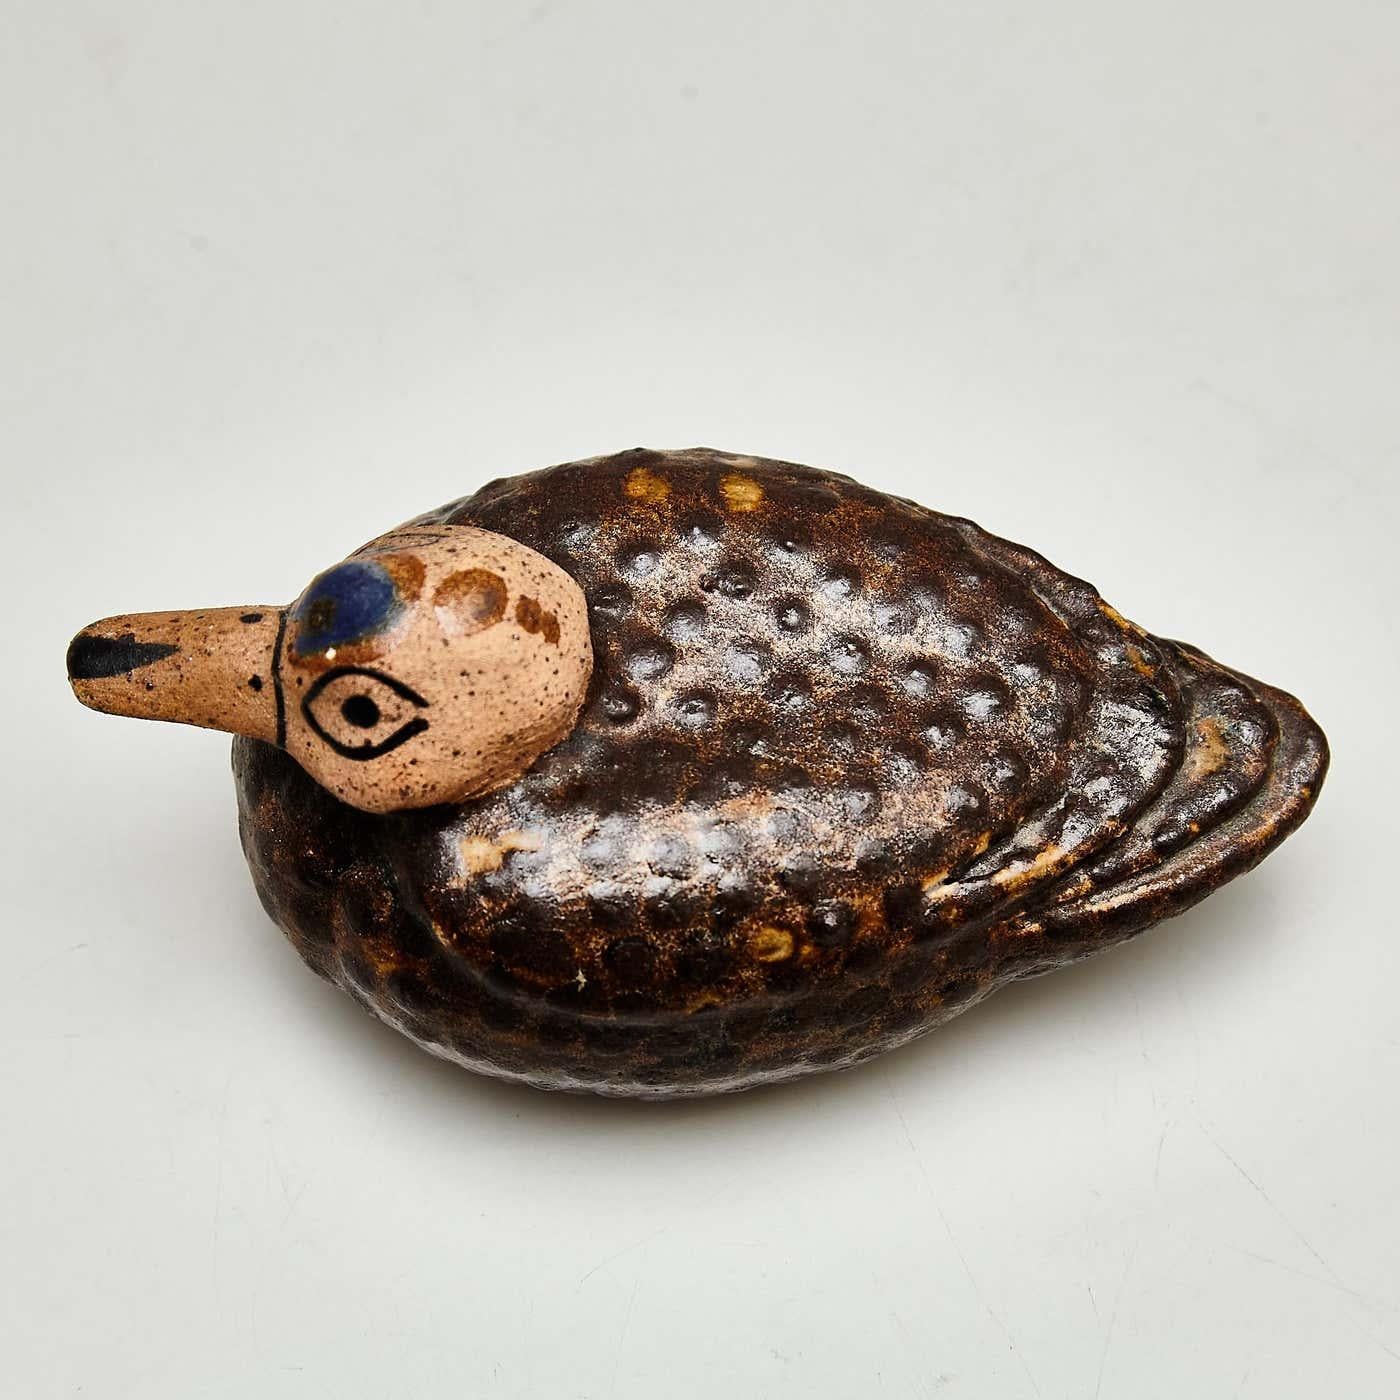 Charming Hand-Painted Ceramic Duck Sculpture - Naif Primitive Art, circa 1940 For Sale 9